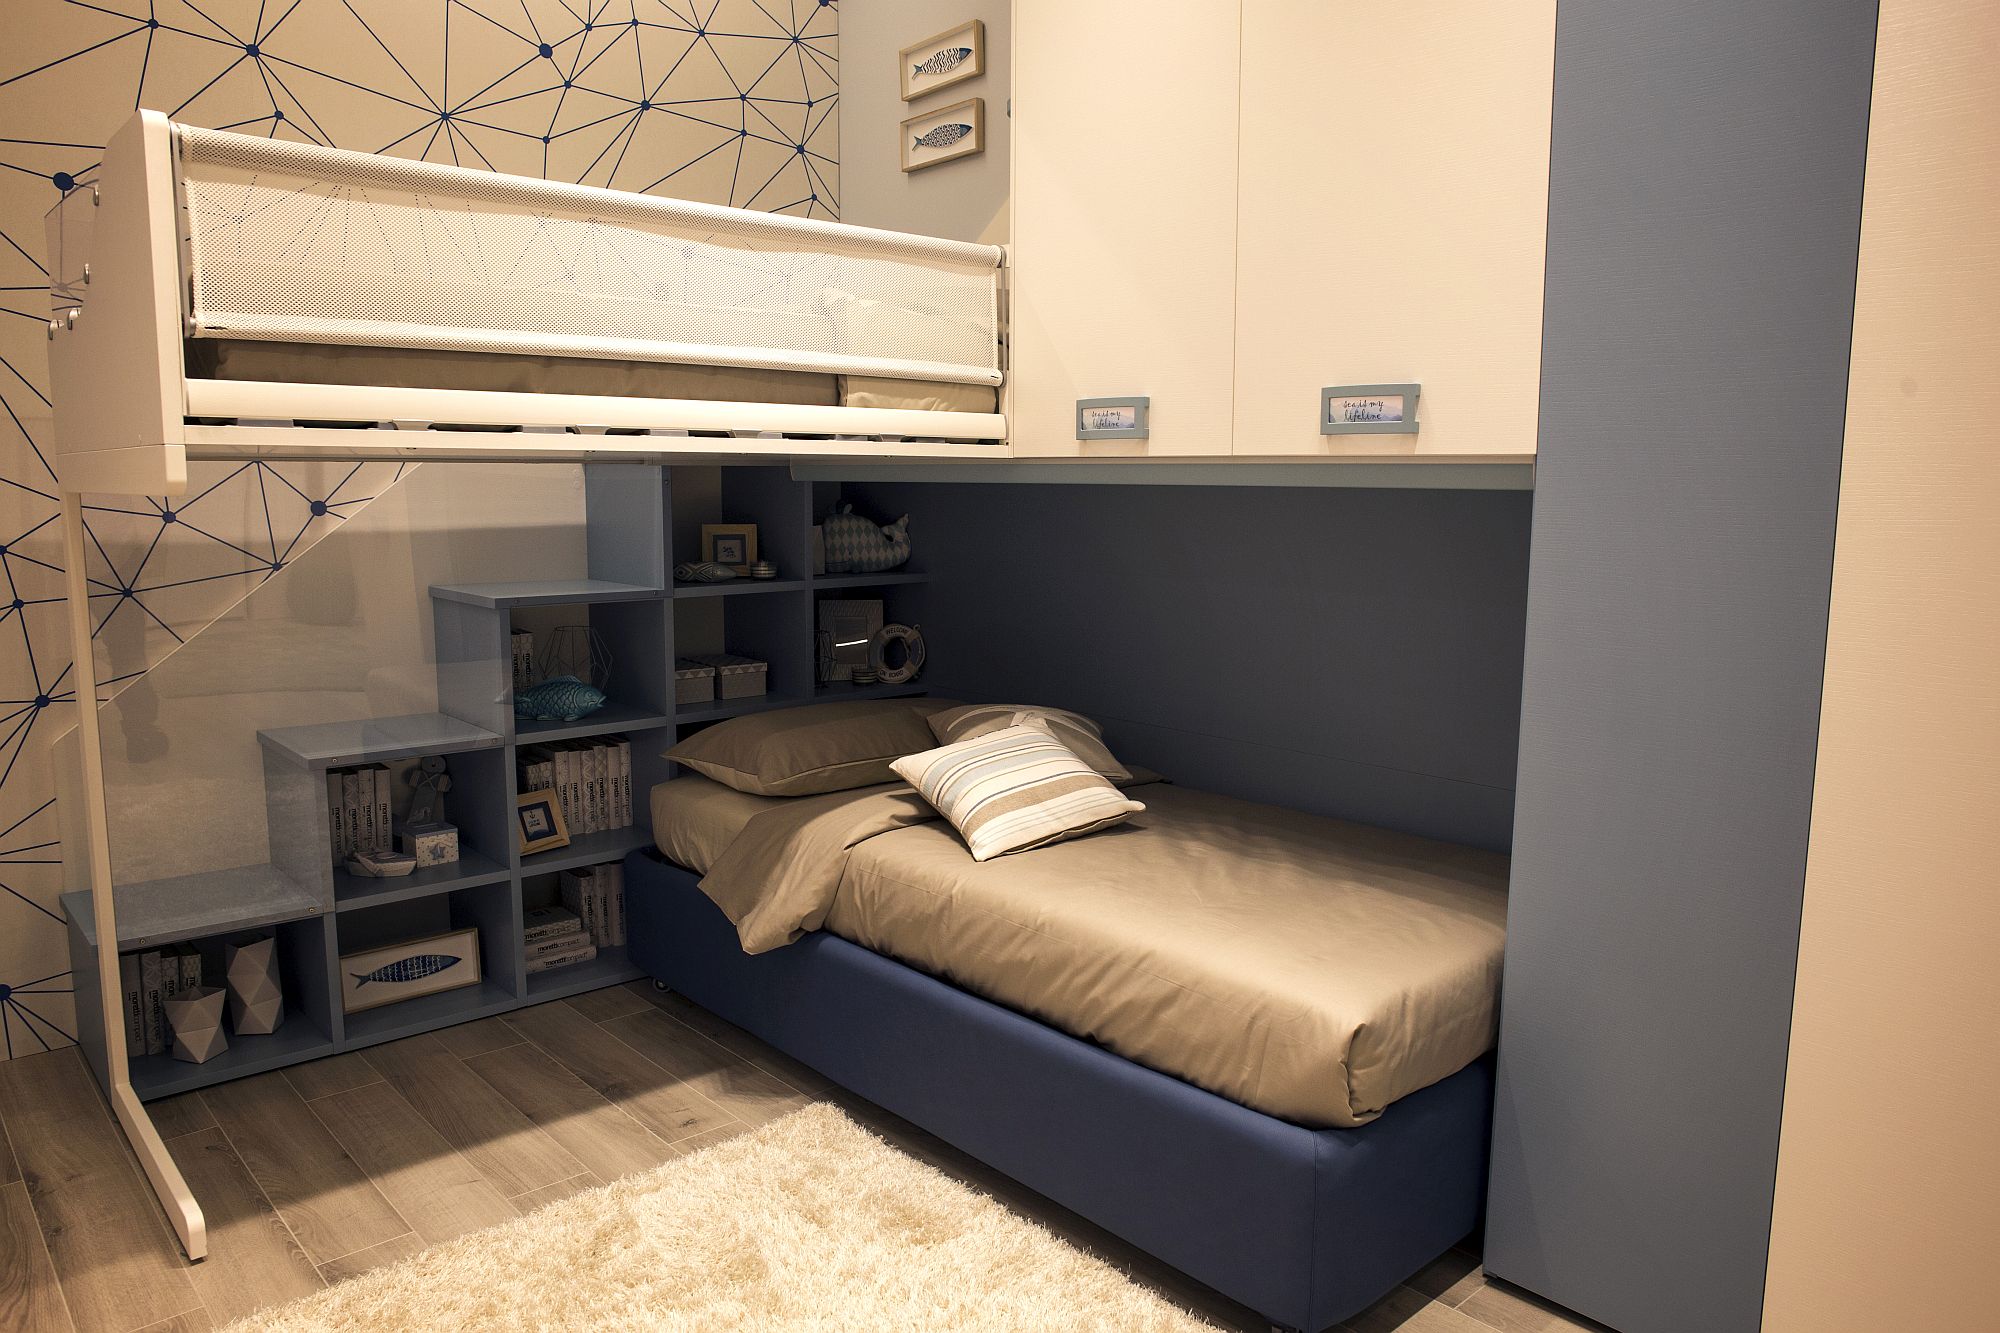 Corner-bunk-bed-idea-with-in-built-storage-options-saves-space-in-more-ways-than-one